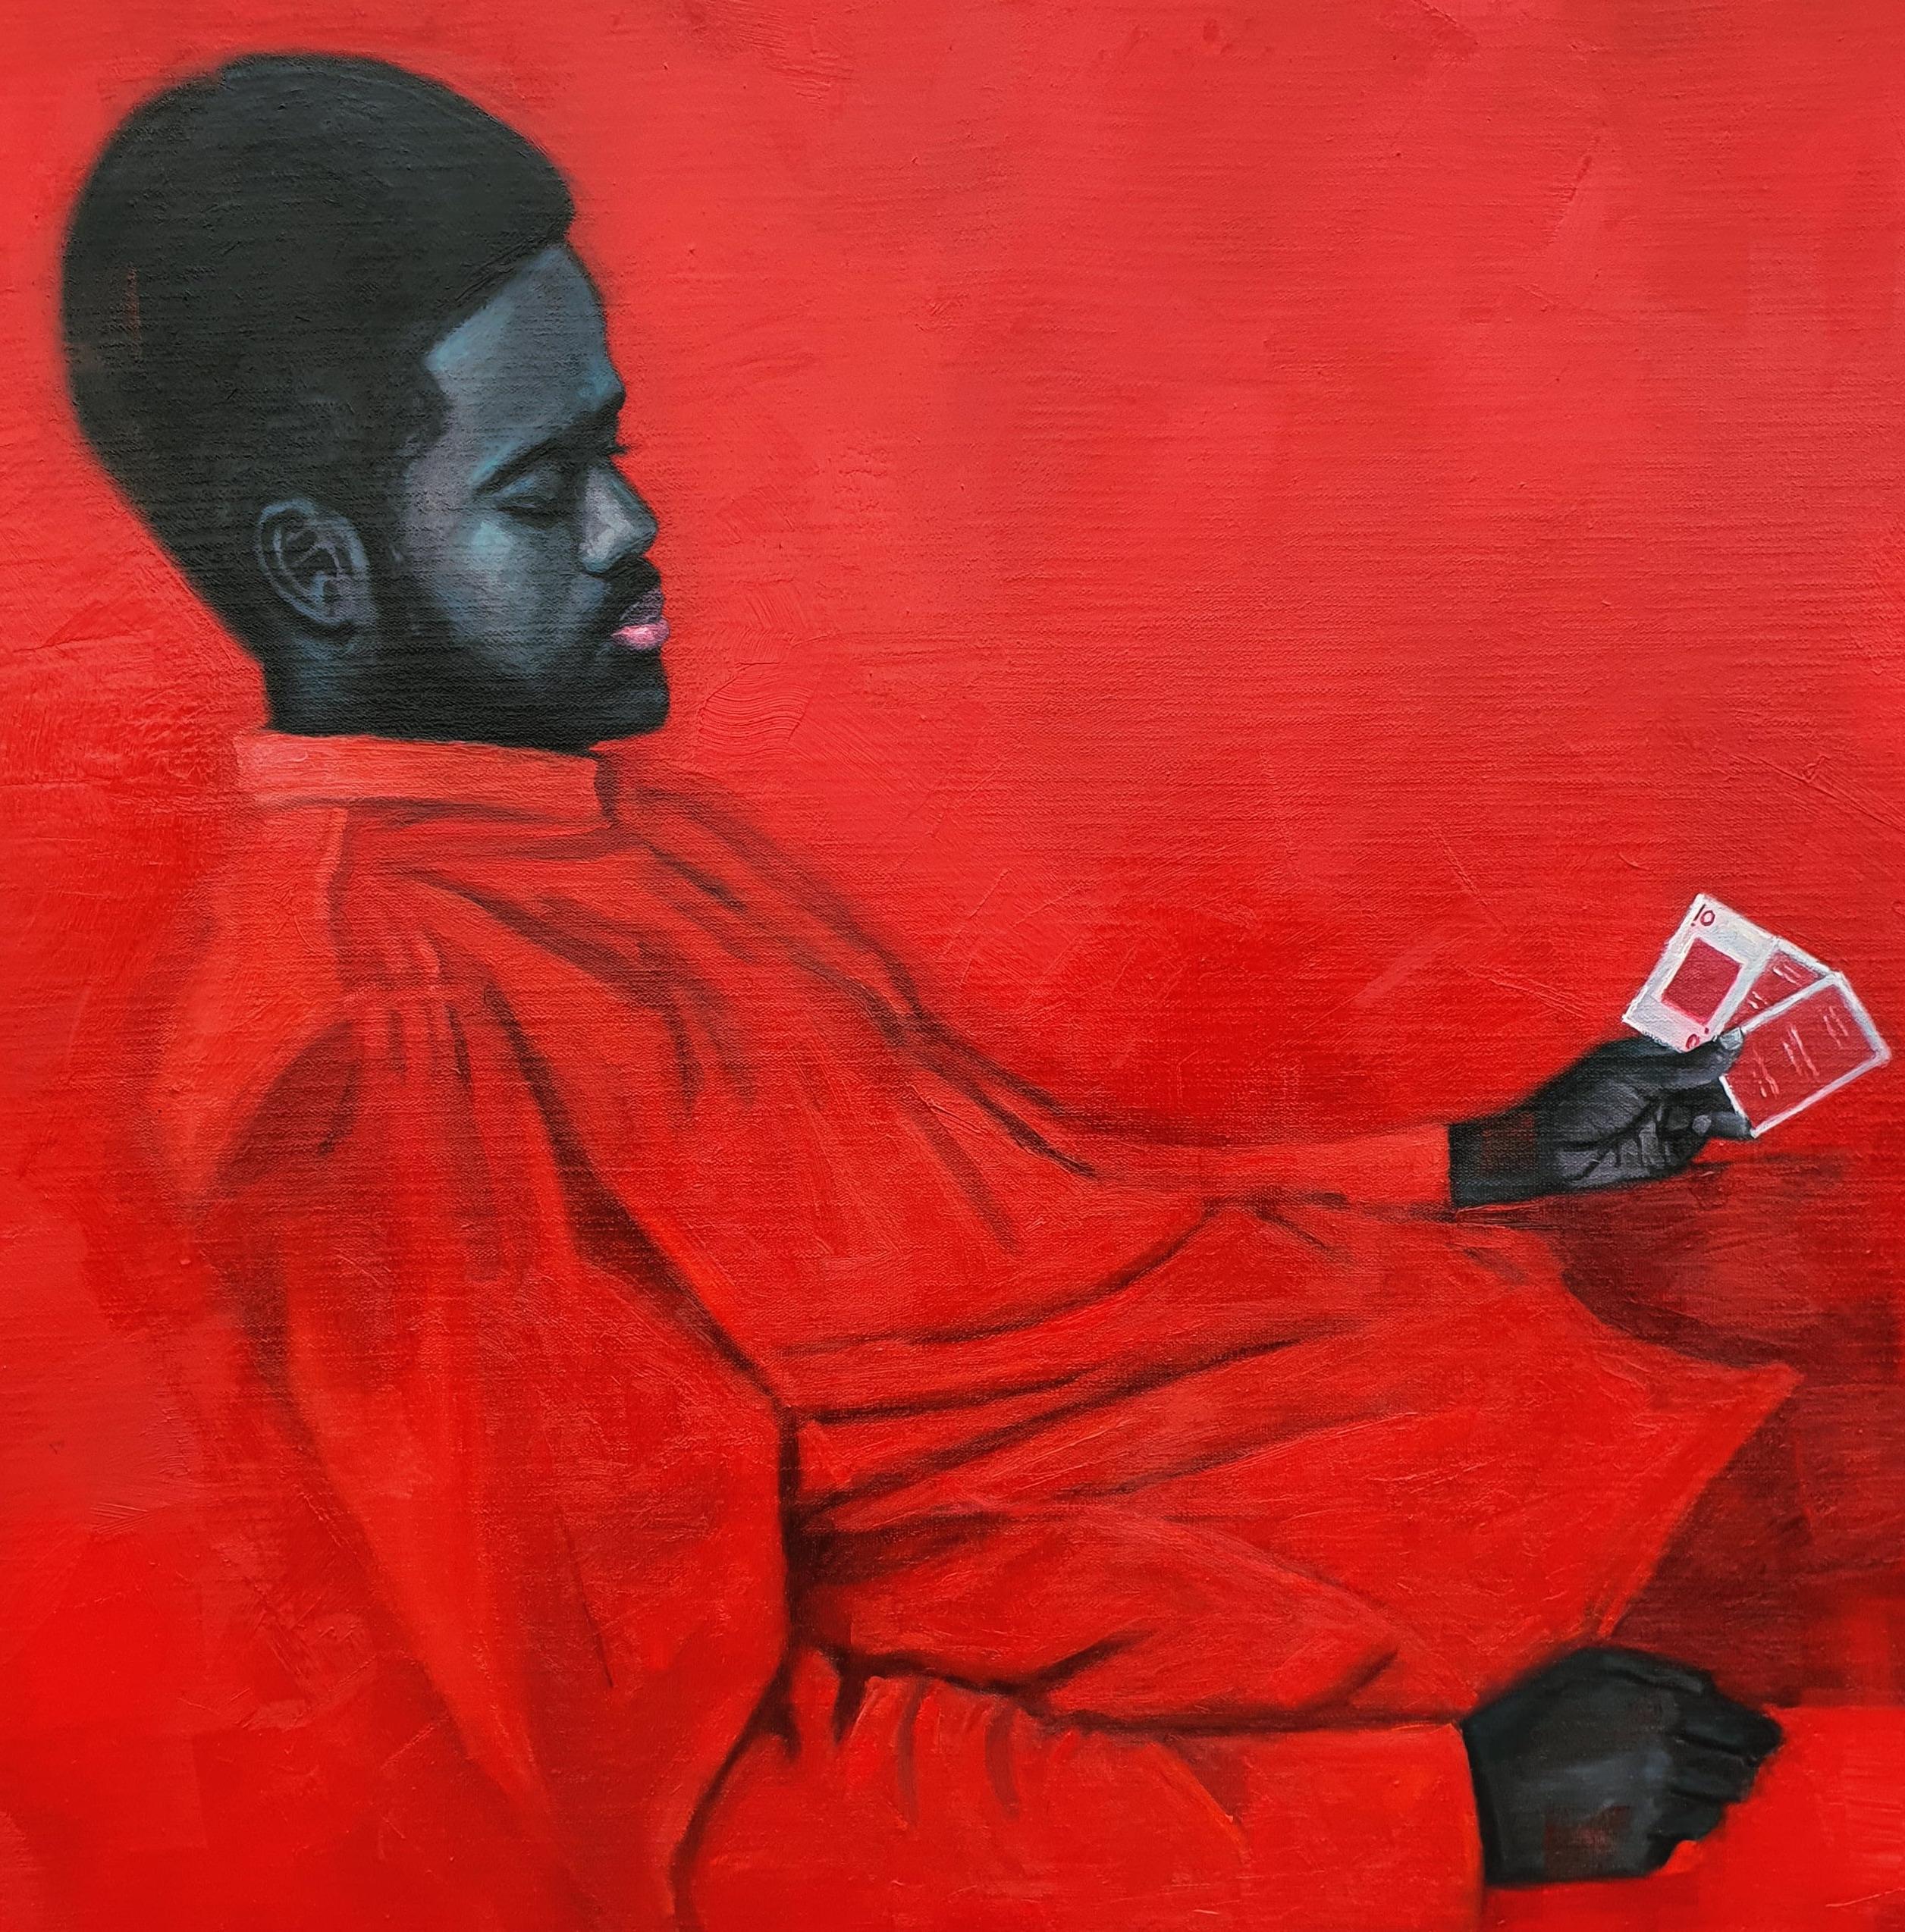 Unlikely Event 1 (Strange Card) - Contemporary Painting by Ajegbomogun Damilola